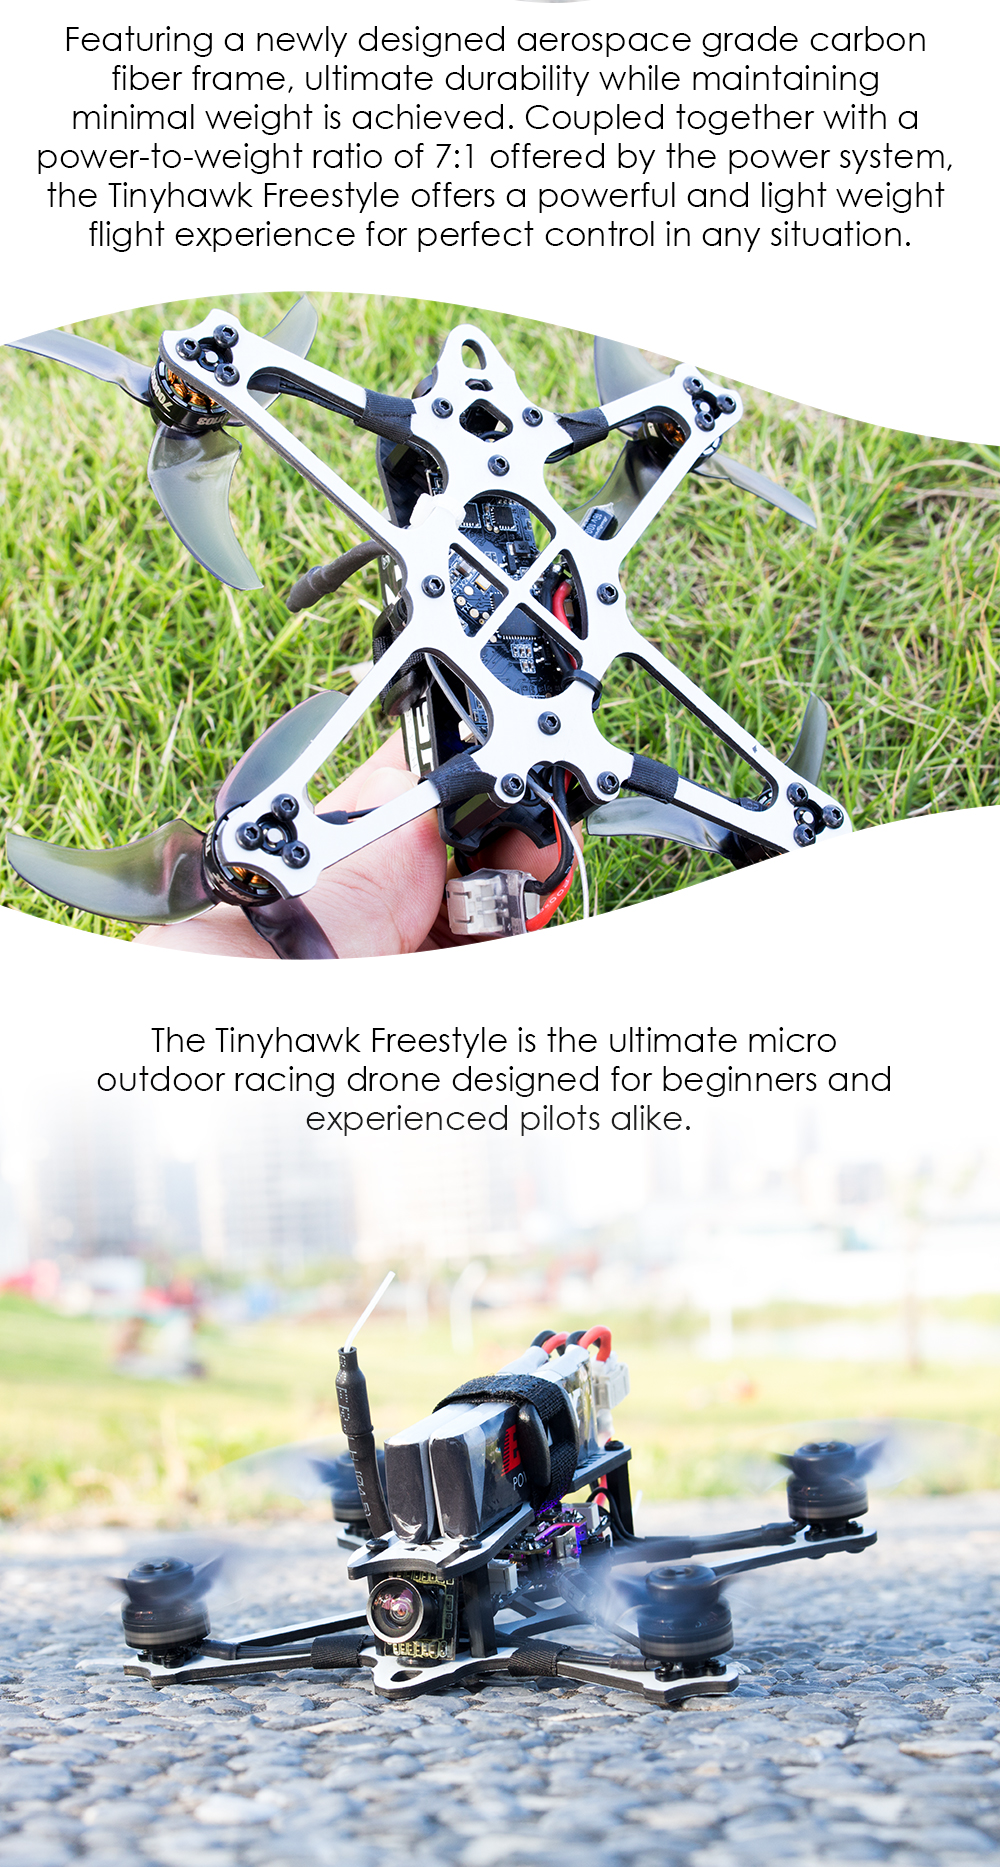 EMAX Tinyhawk Freestyle 115mm 2.5inch F4 5A ESC FPV Racing RC Drone BNF Version 3